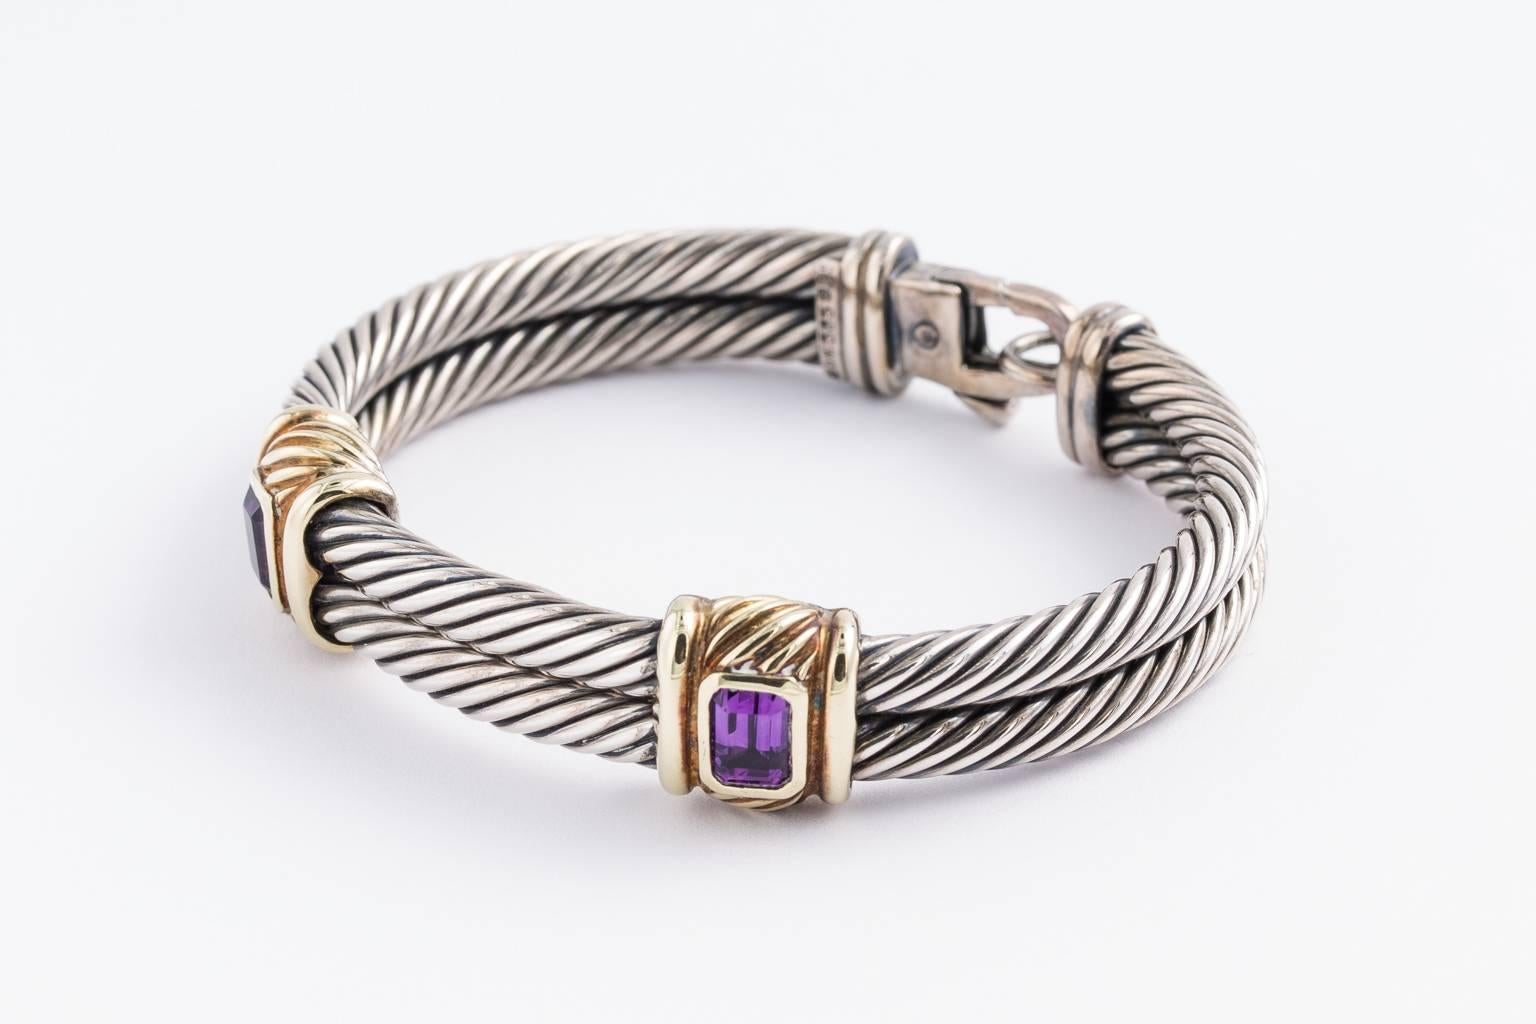 David Yurman sterling silver and heavy 14k gold trim-double cables 2 square cut amethyst-trim with gold-bracelet.
PERIOD:1980s-Present
STYLES:Contemporary
MATERIALS:Gold
